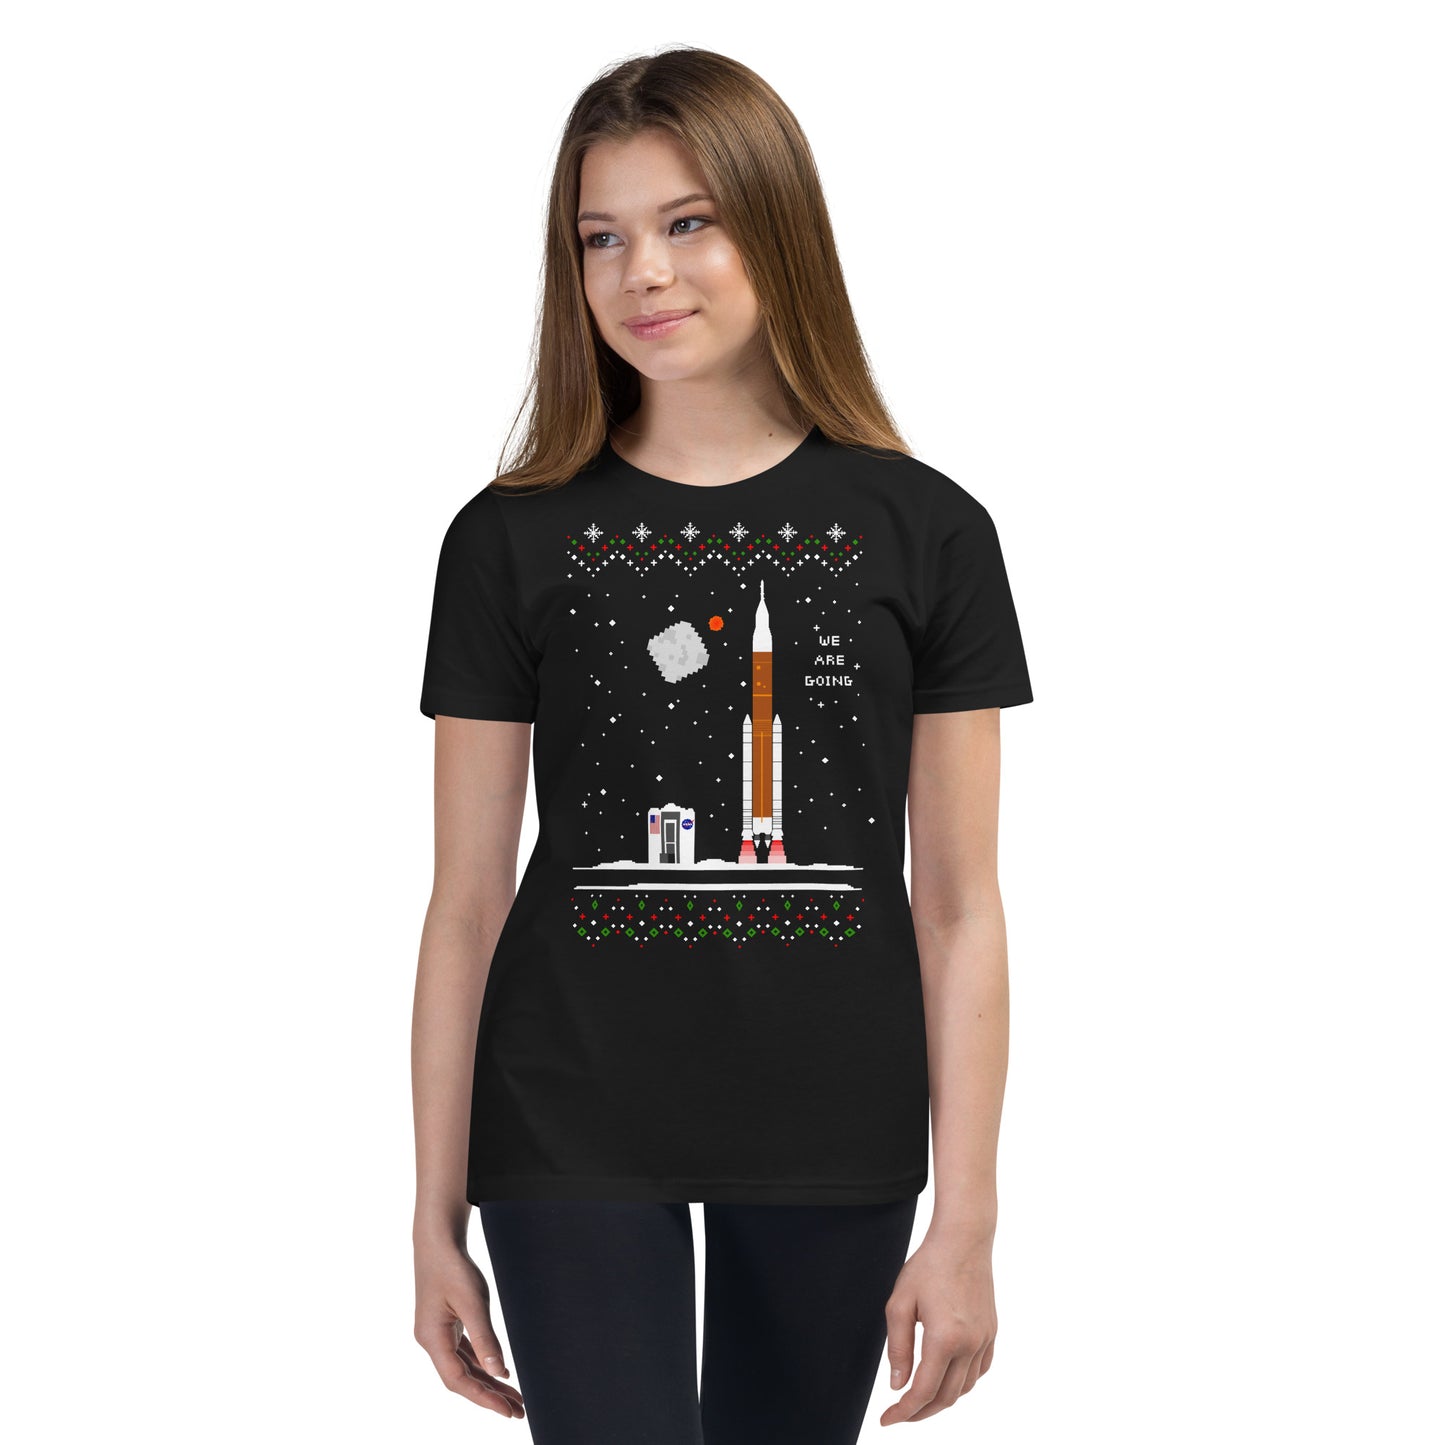 We Are Going Ugly Space Jr. Astro Tee (Limited Edition)